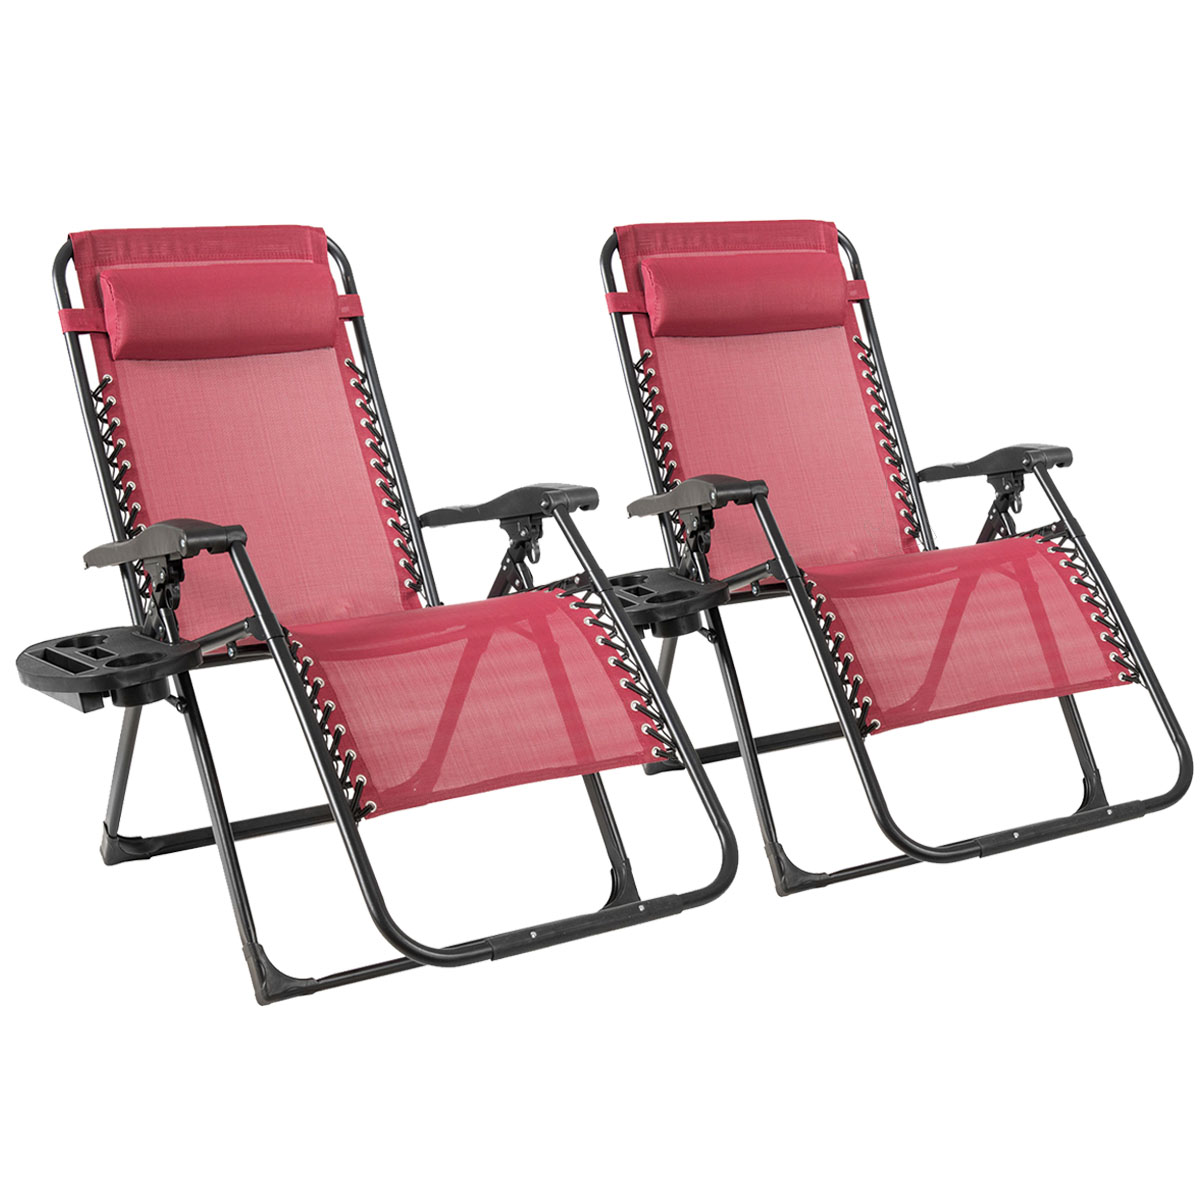 2PC Zero Gravity Chair Oversize Lounge Patio Heavy Duty Folding Recliner Red - image 1 of 10